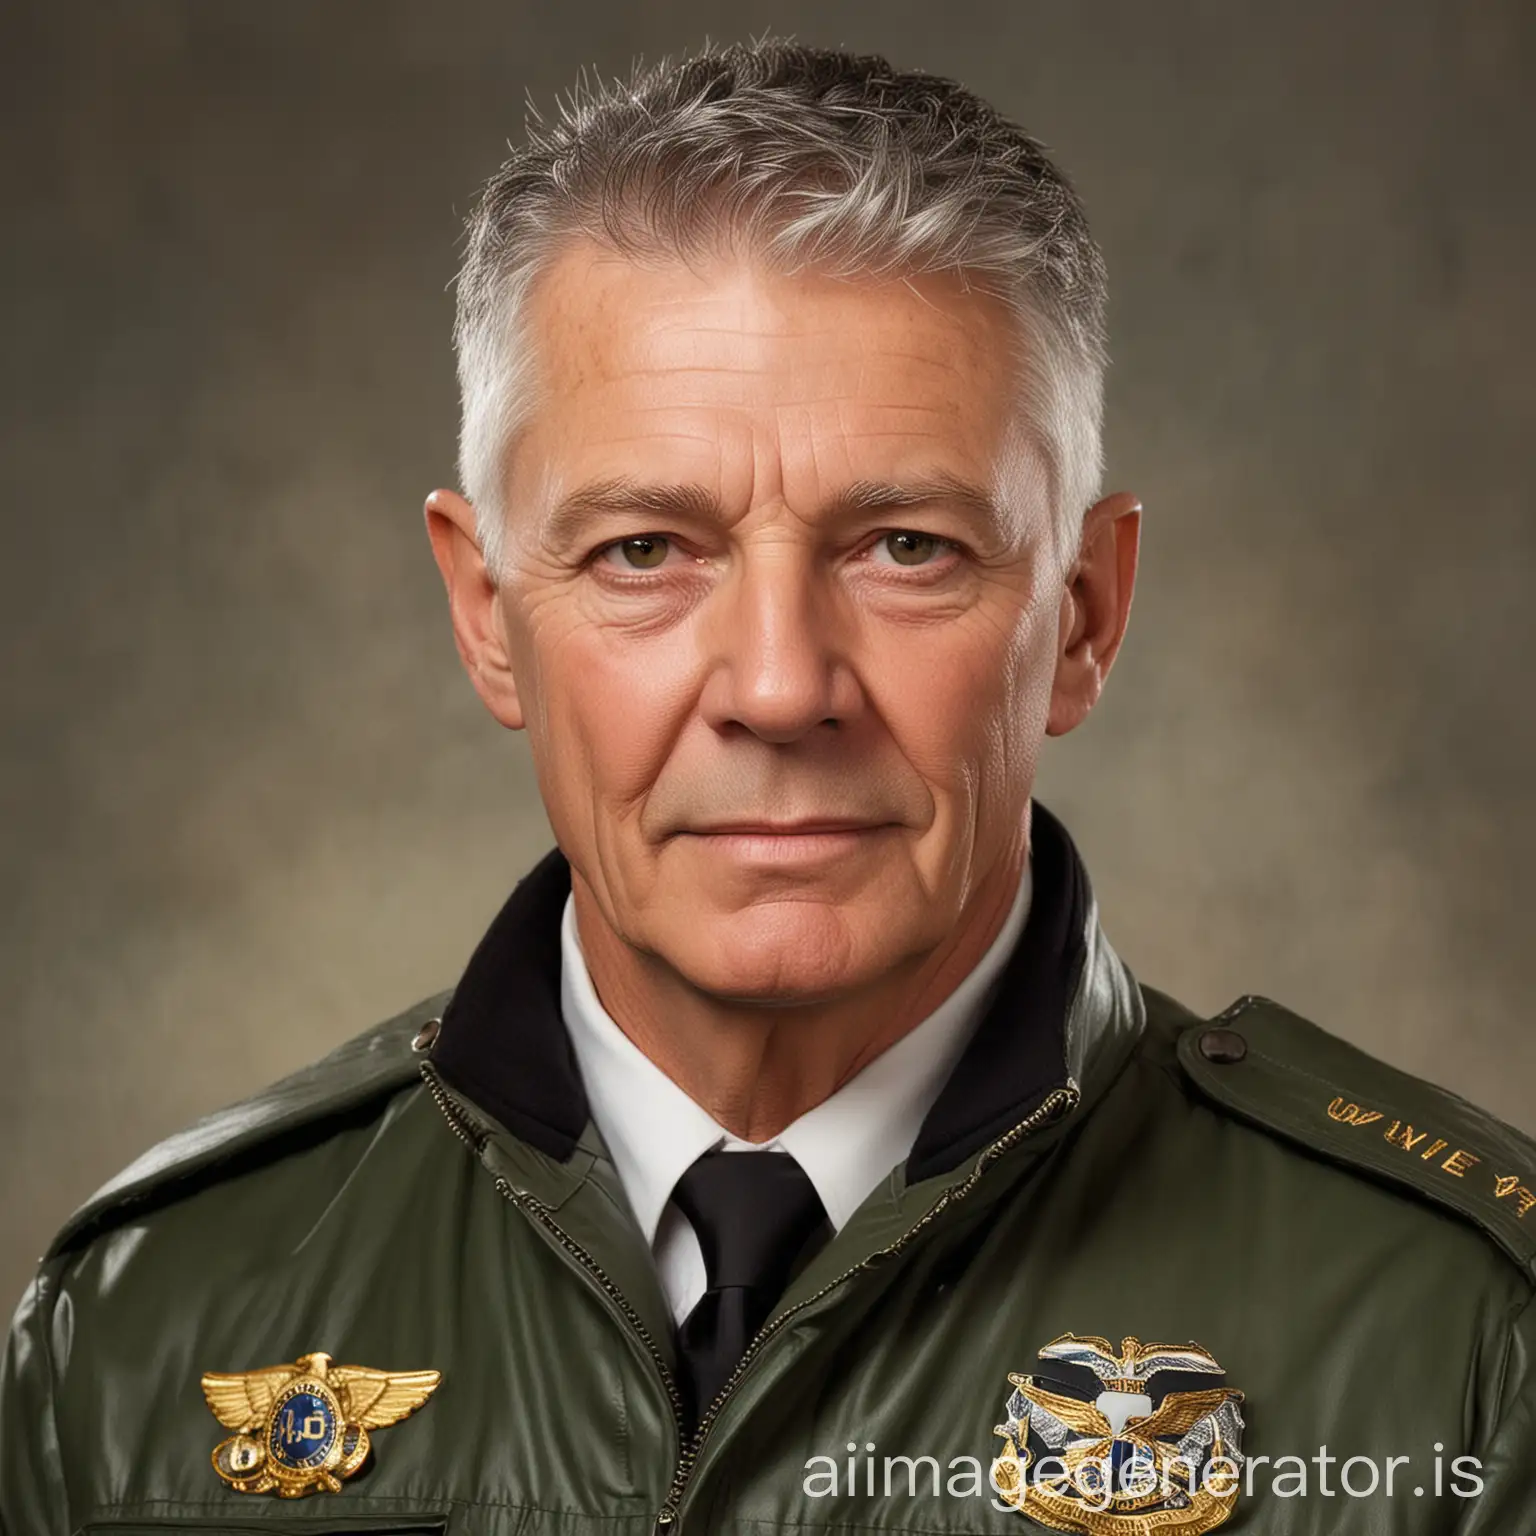 Very handsome and fit and attractive man in his 70's. He has a military hair cut, and is wearing a pilot uniform. He is also wearing a wedding ring. He has hazel eyes.